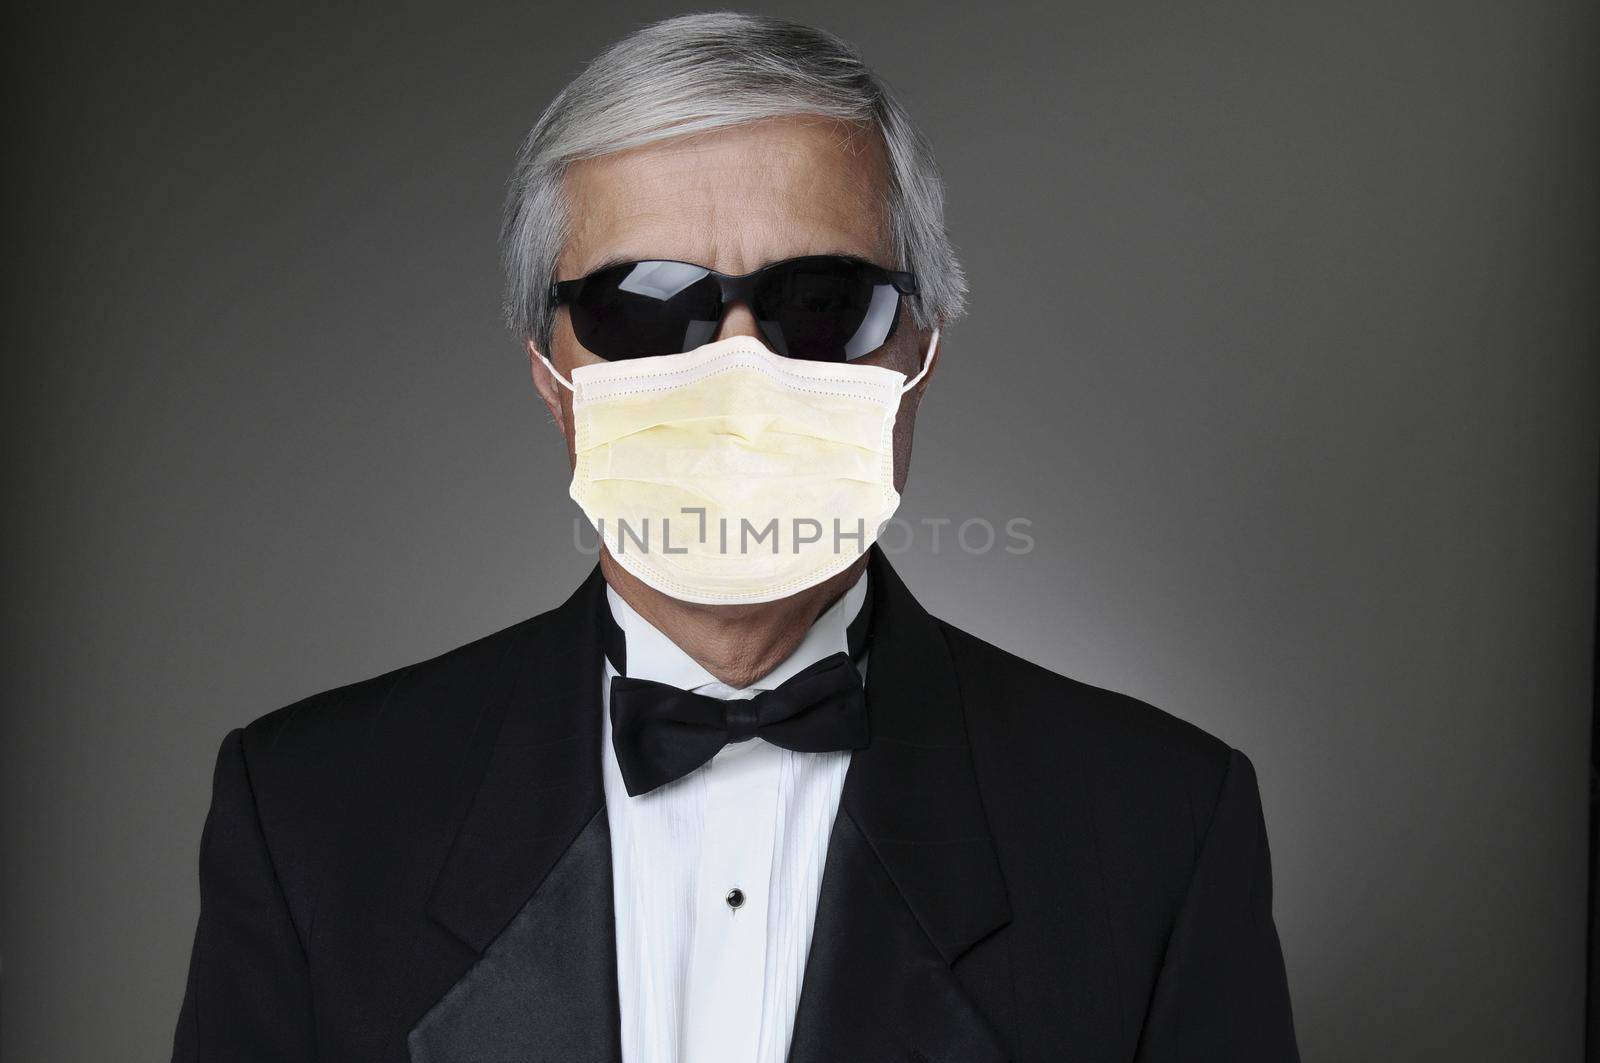 Portrait of a middle aged man in a tuxedo wearing a COVID-19 protective mask and sunglasses. Horizontal format over a gray background.